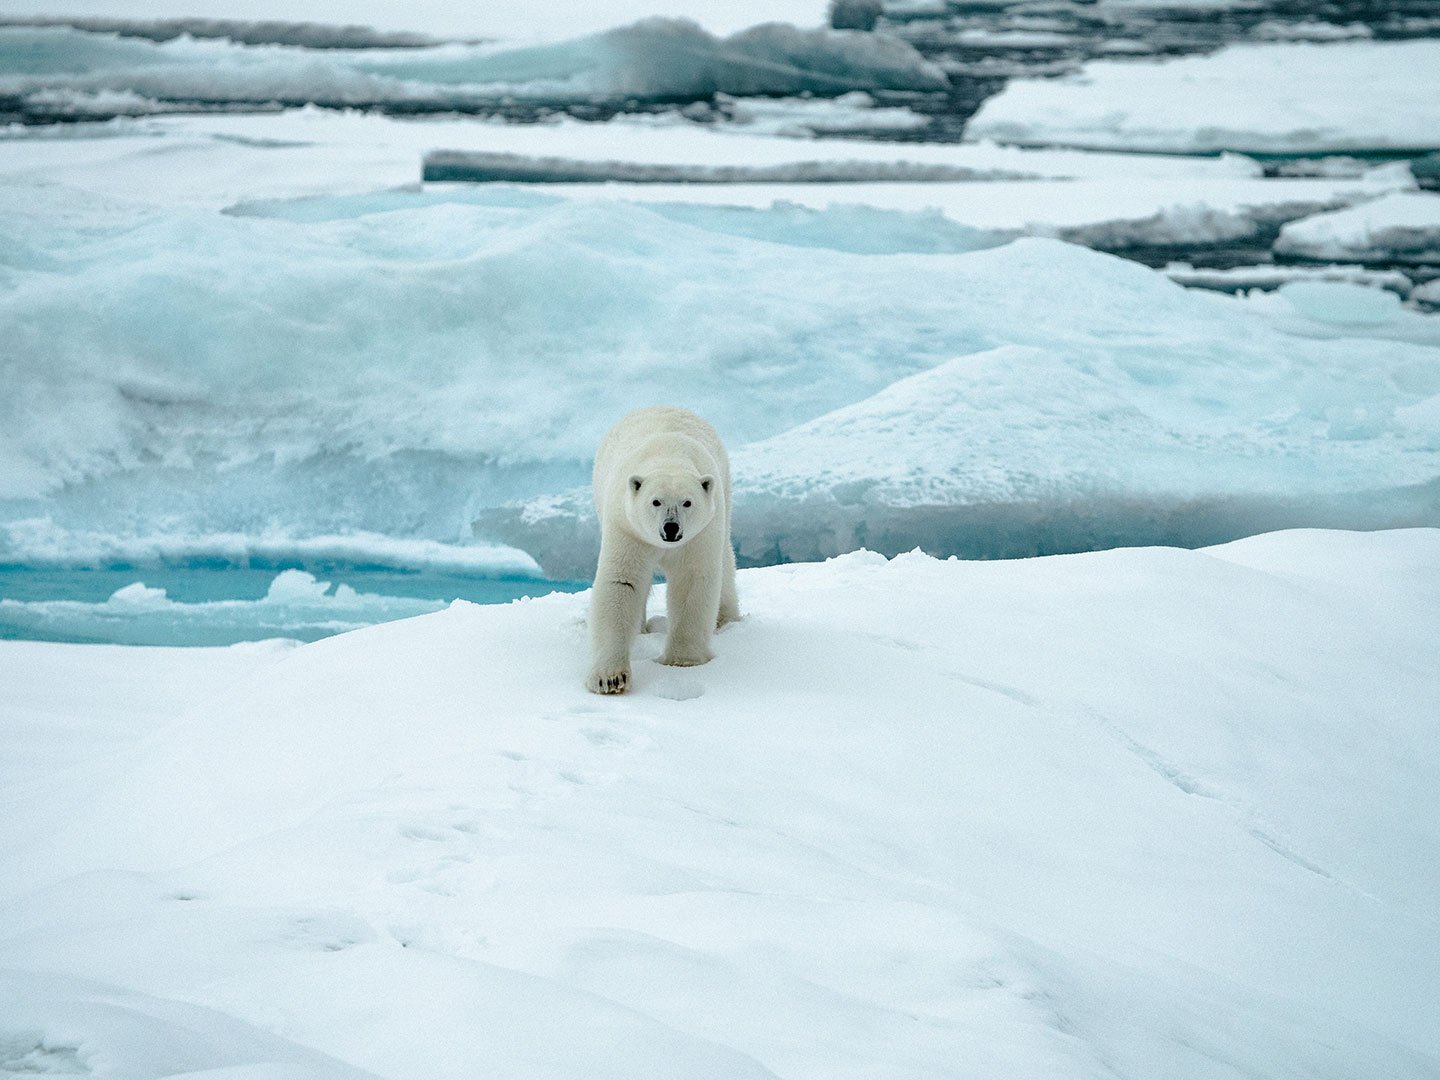 How to see polar bears in Svalbard